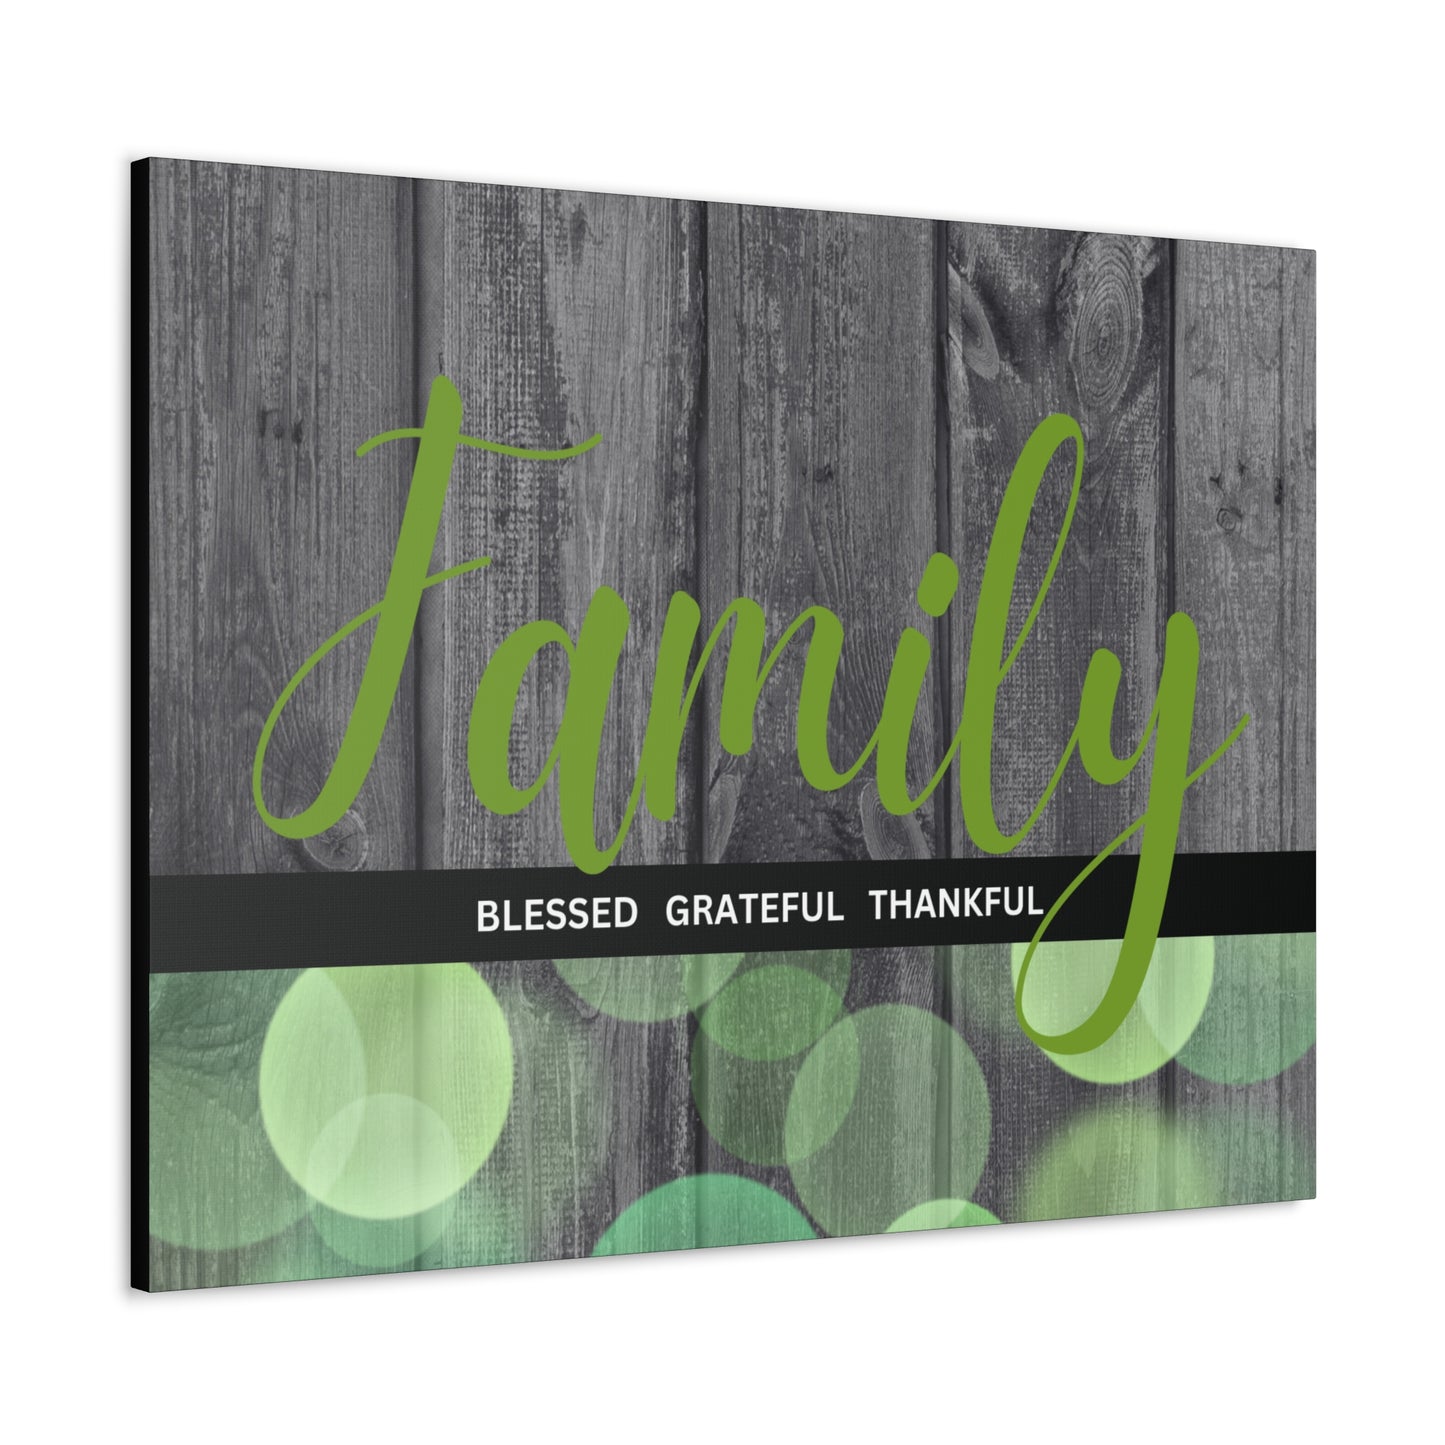 Christian Wall Art: Family, Blessed, Grateful, Thankful (Wood Frame Ready to Hang)